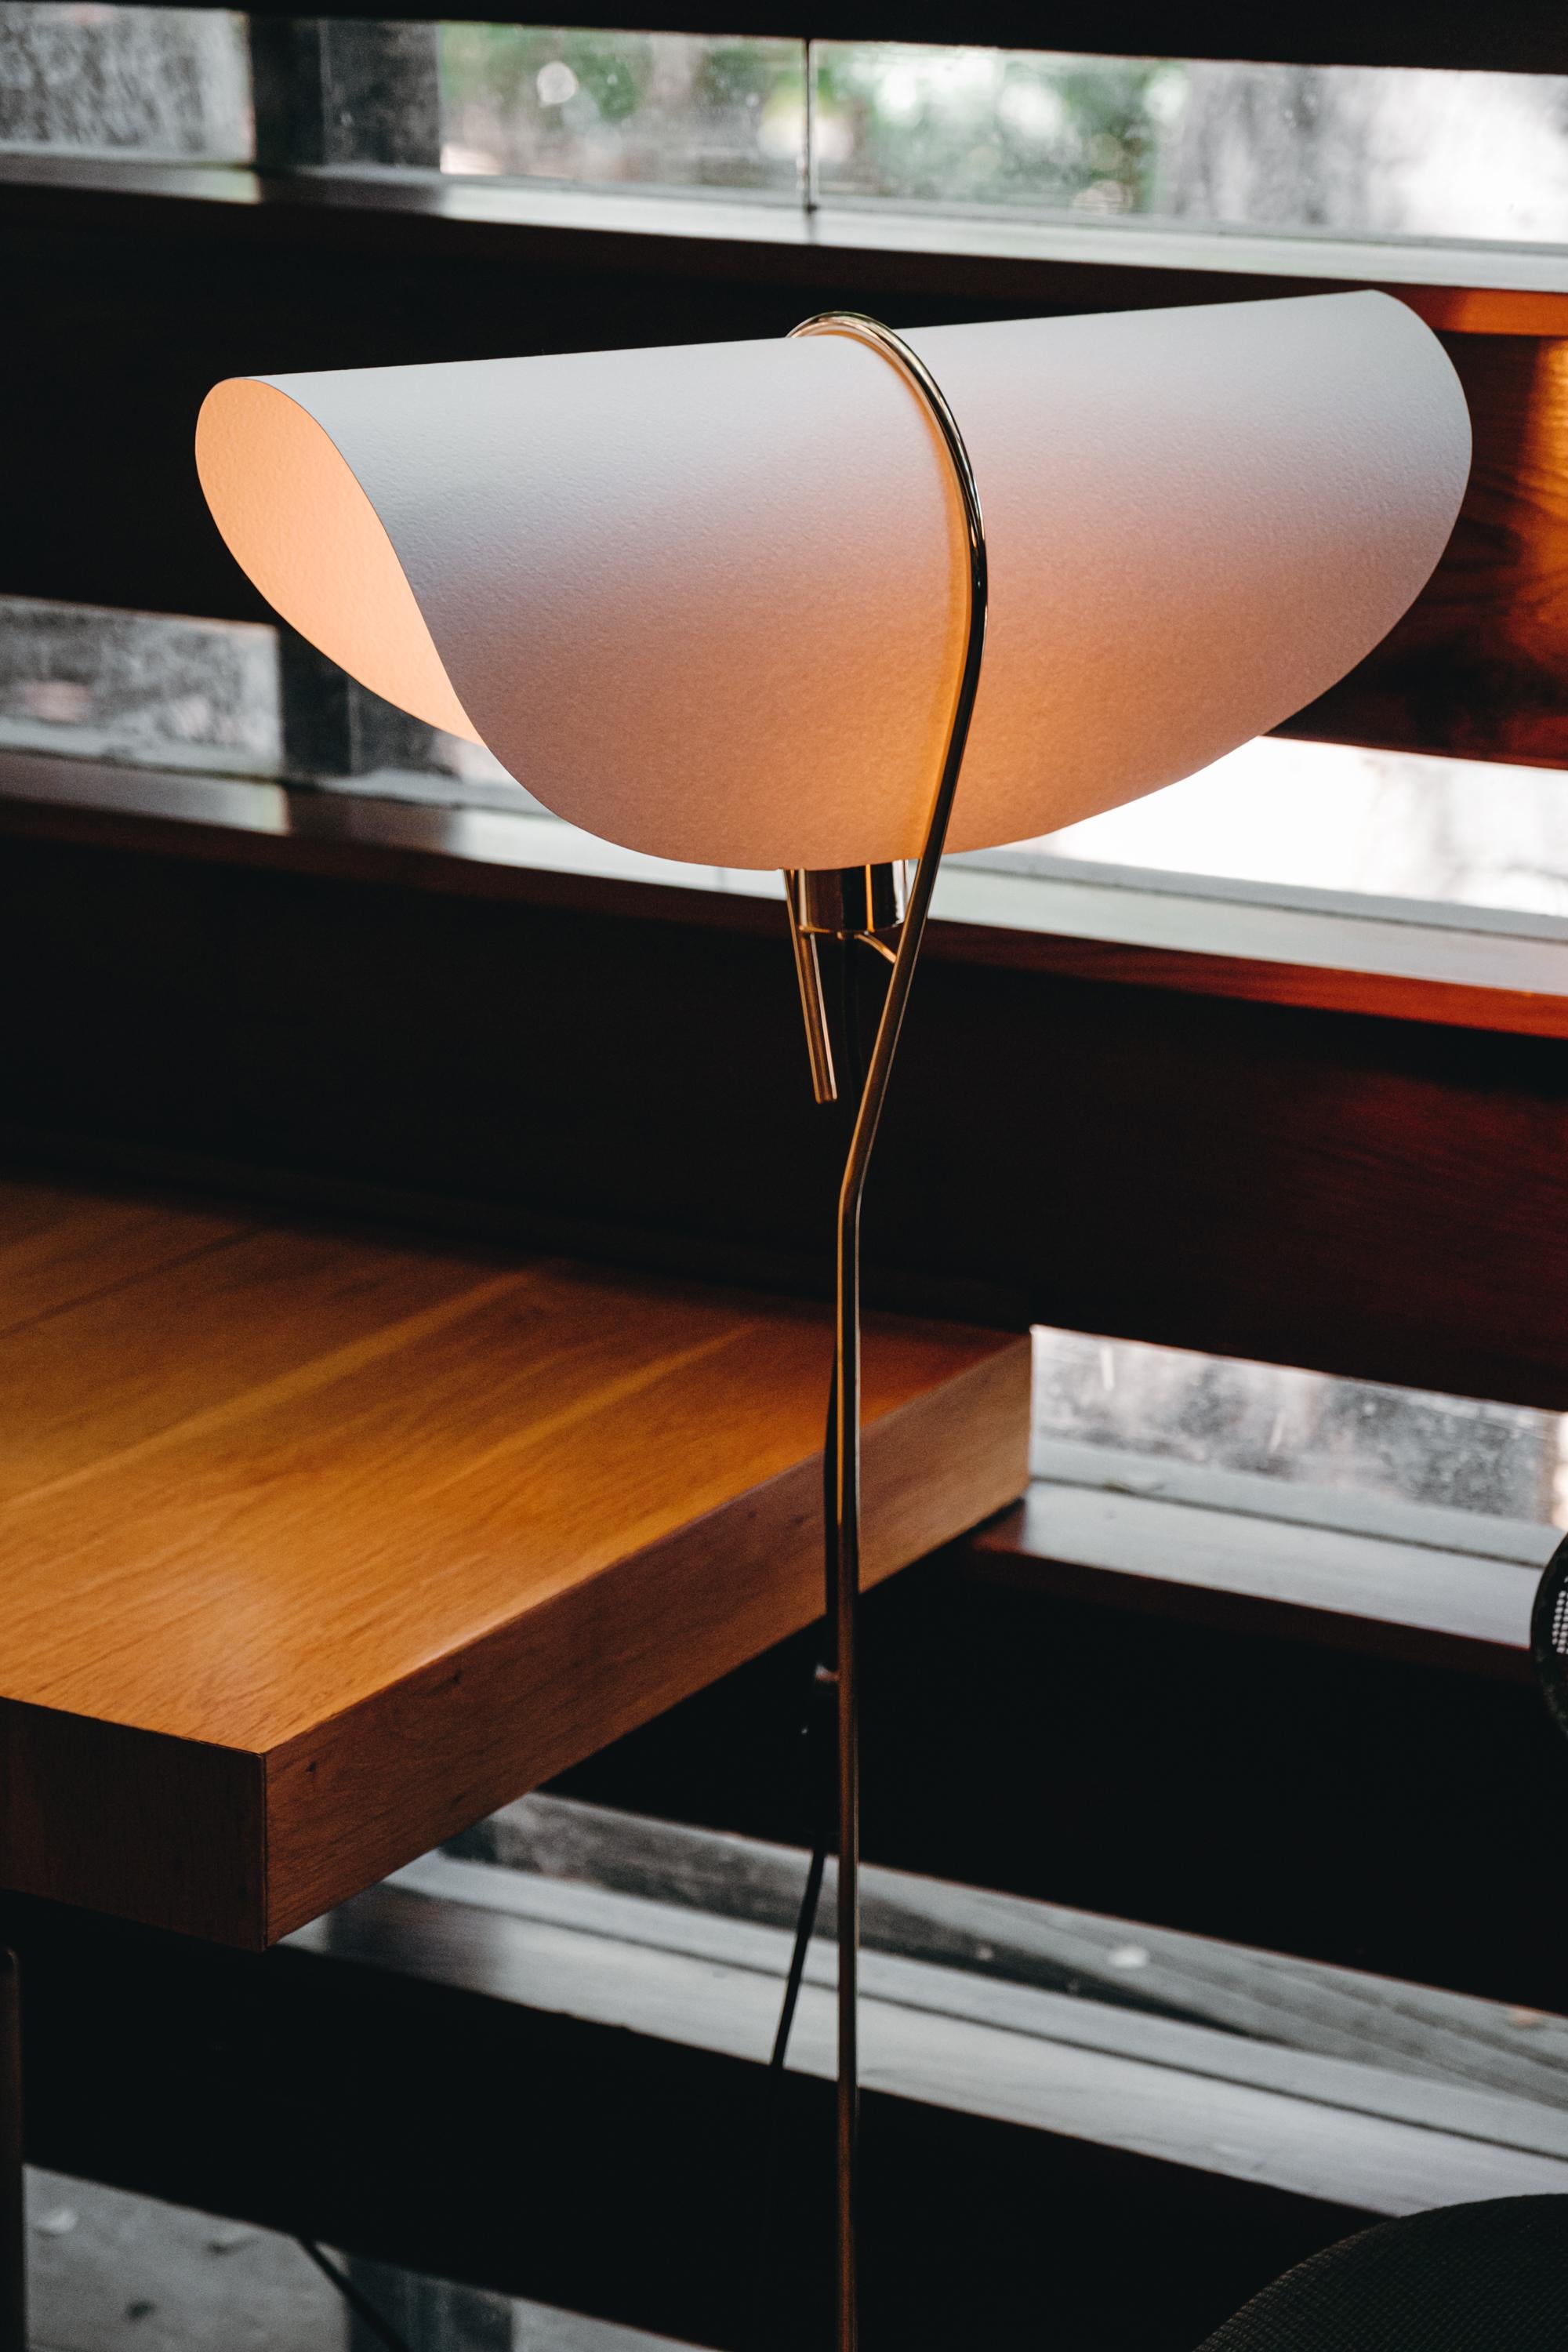 Carl Auböck 'Nun' floor lamp. Designed in 1950, this versatile and Minimalist Viennese lamps is executed in brass with a cast iron base and sculptural hard paper shade by Werkstätte Carl Auböck, Austria. 

Price is per item. One lamp in stock and